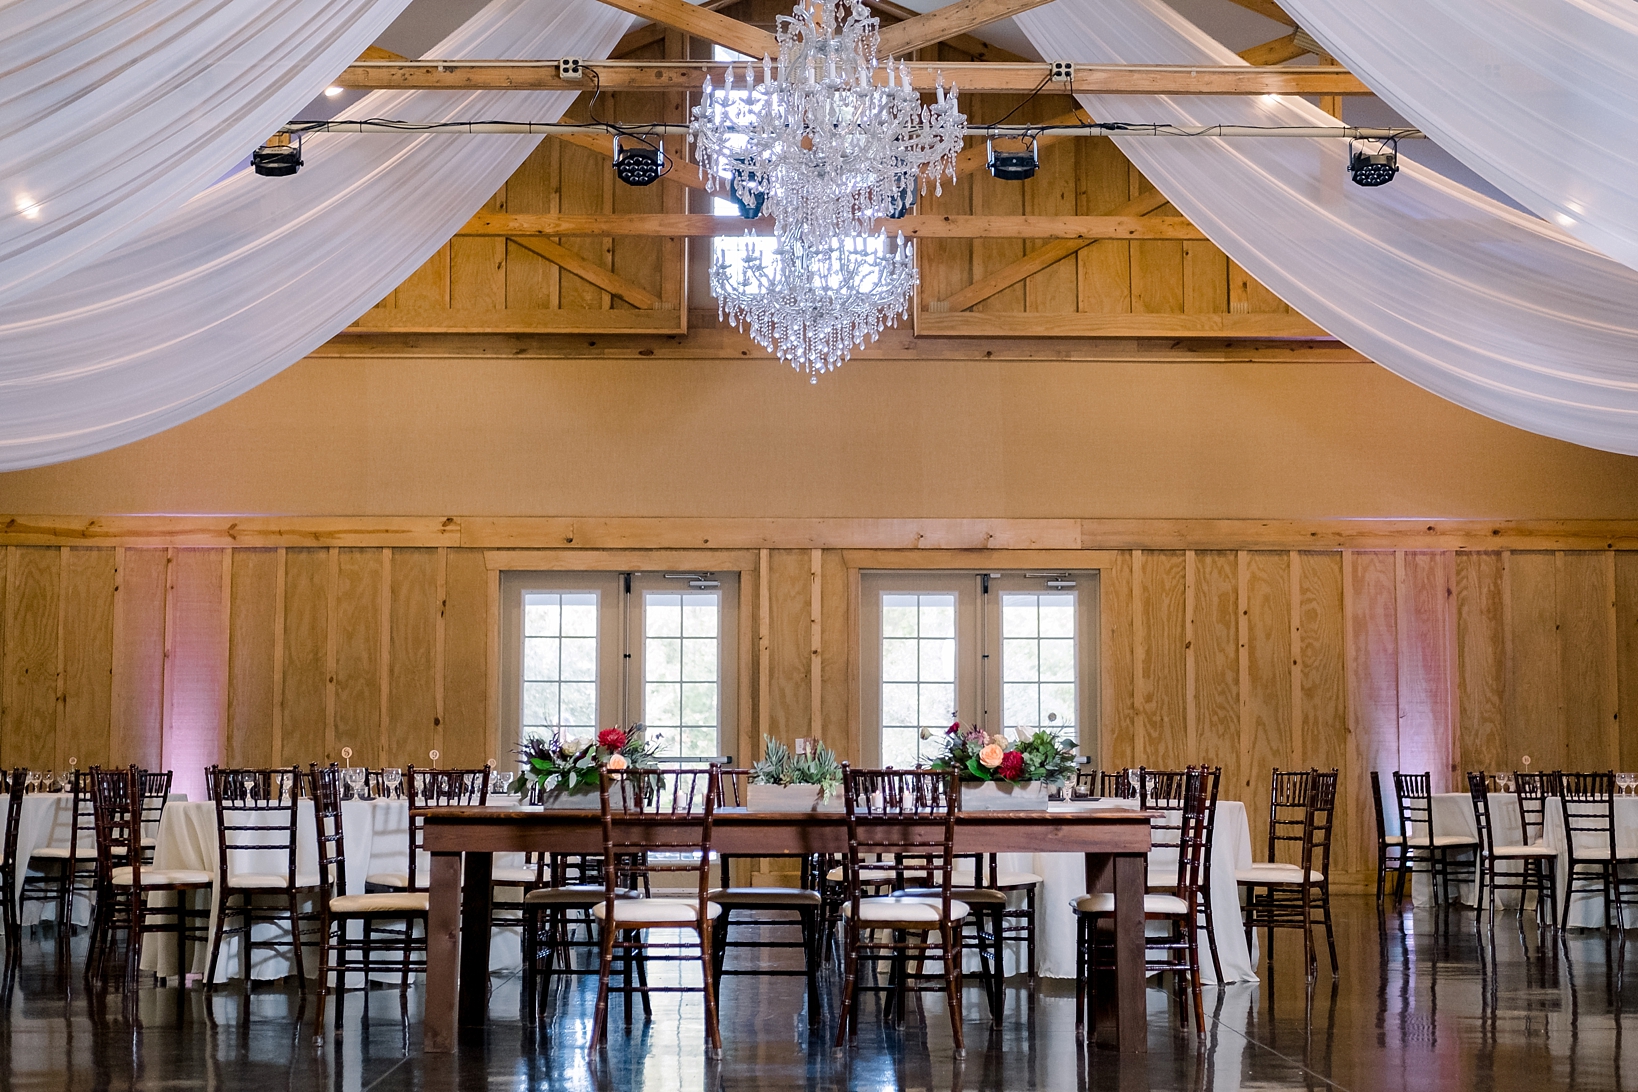 Full room shot of all the tables and chandeliers in the reception barn at Bowing Oaks Plantation